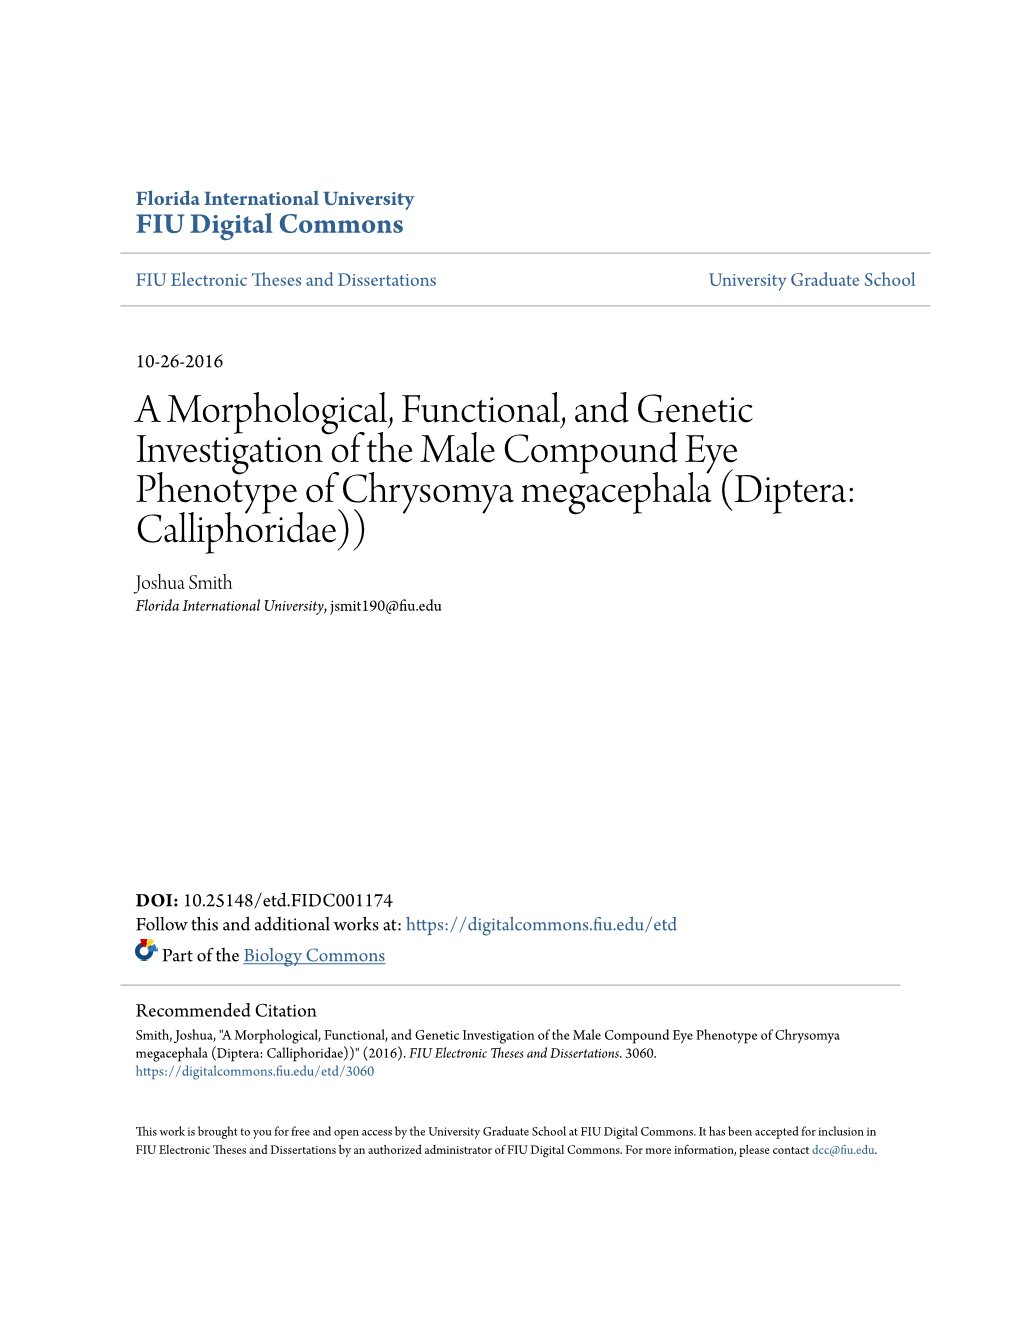 A Morphological, Functional, and Genetic